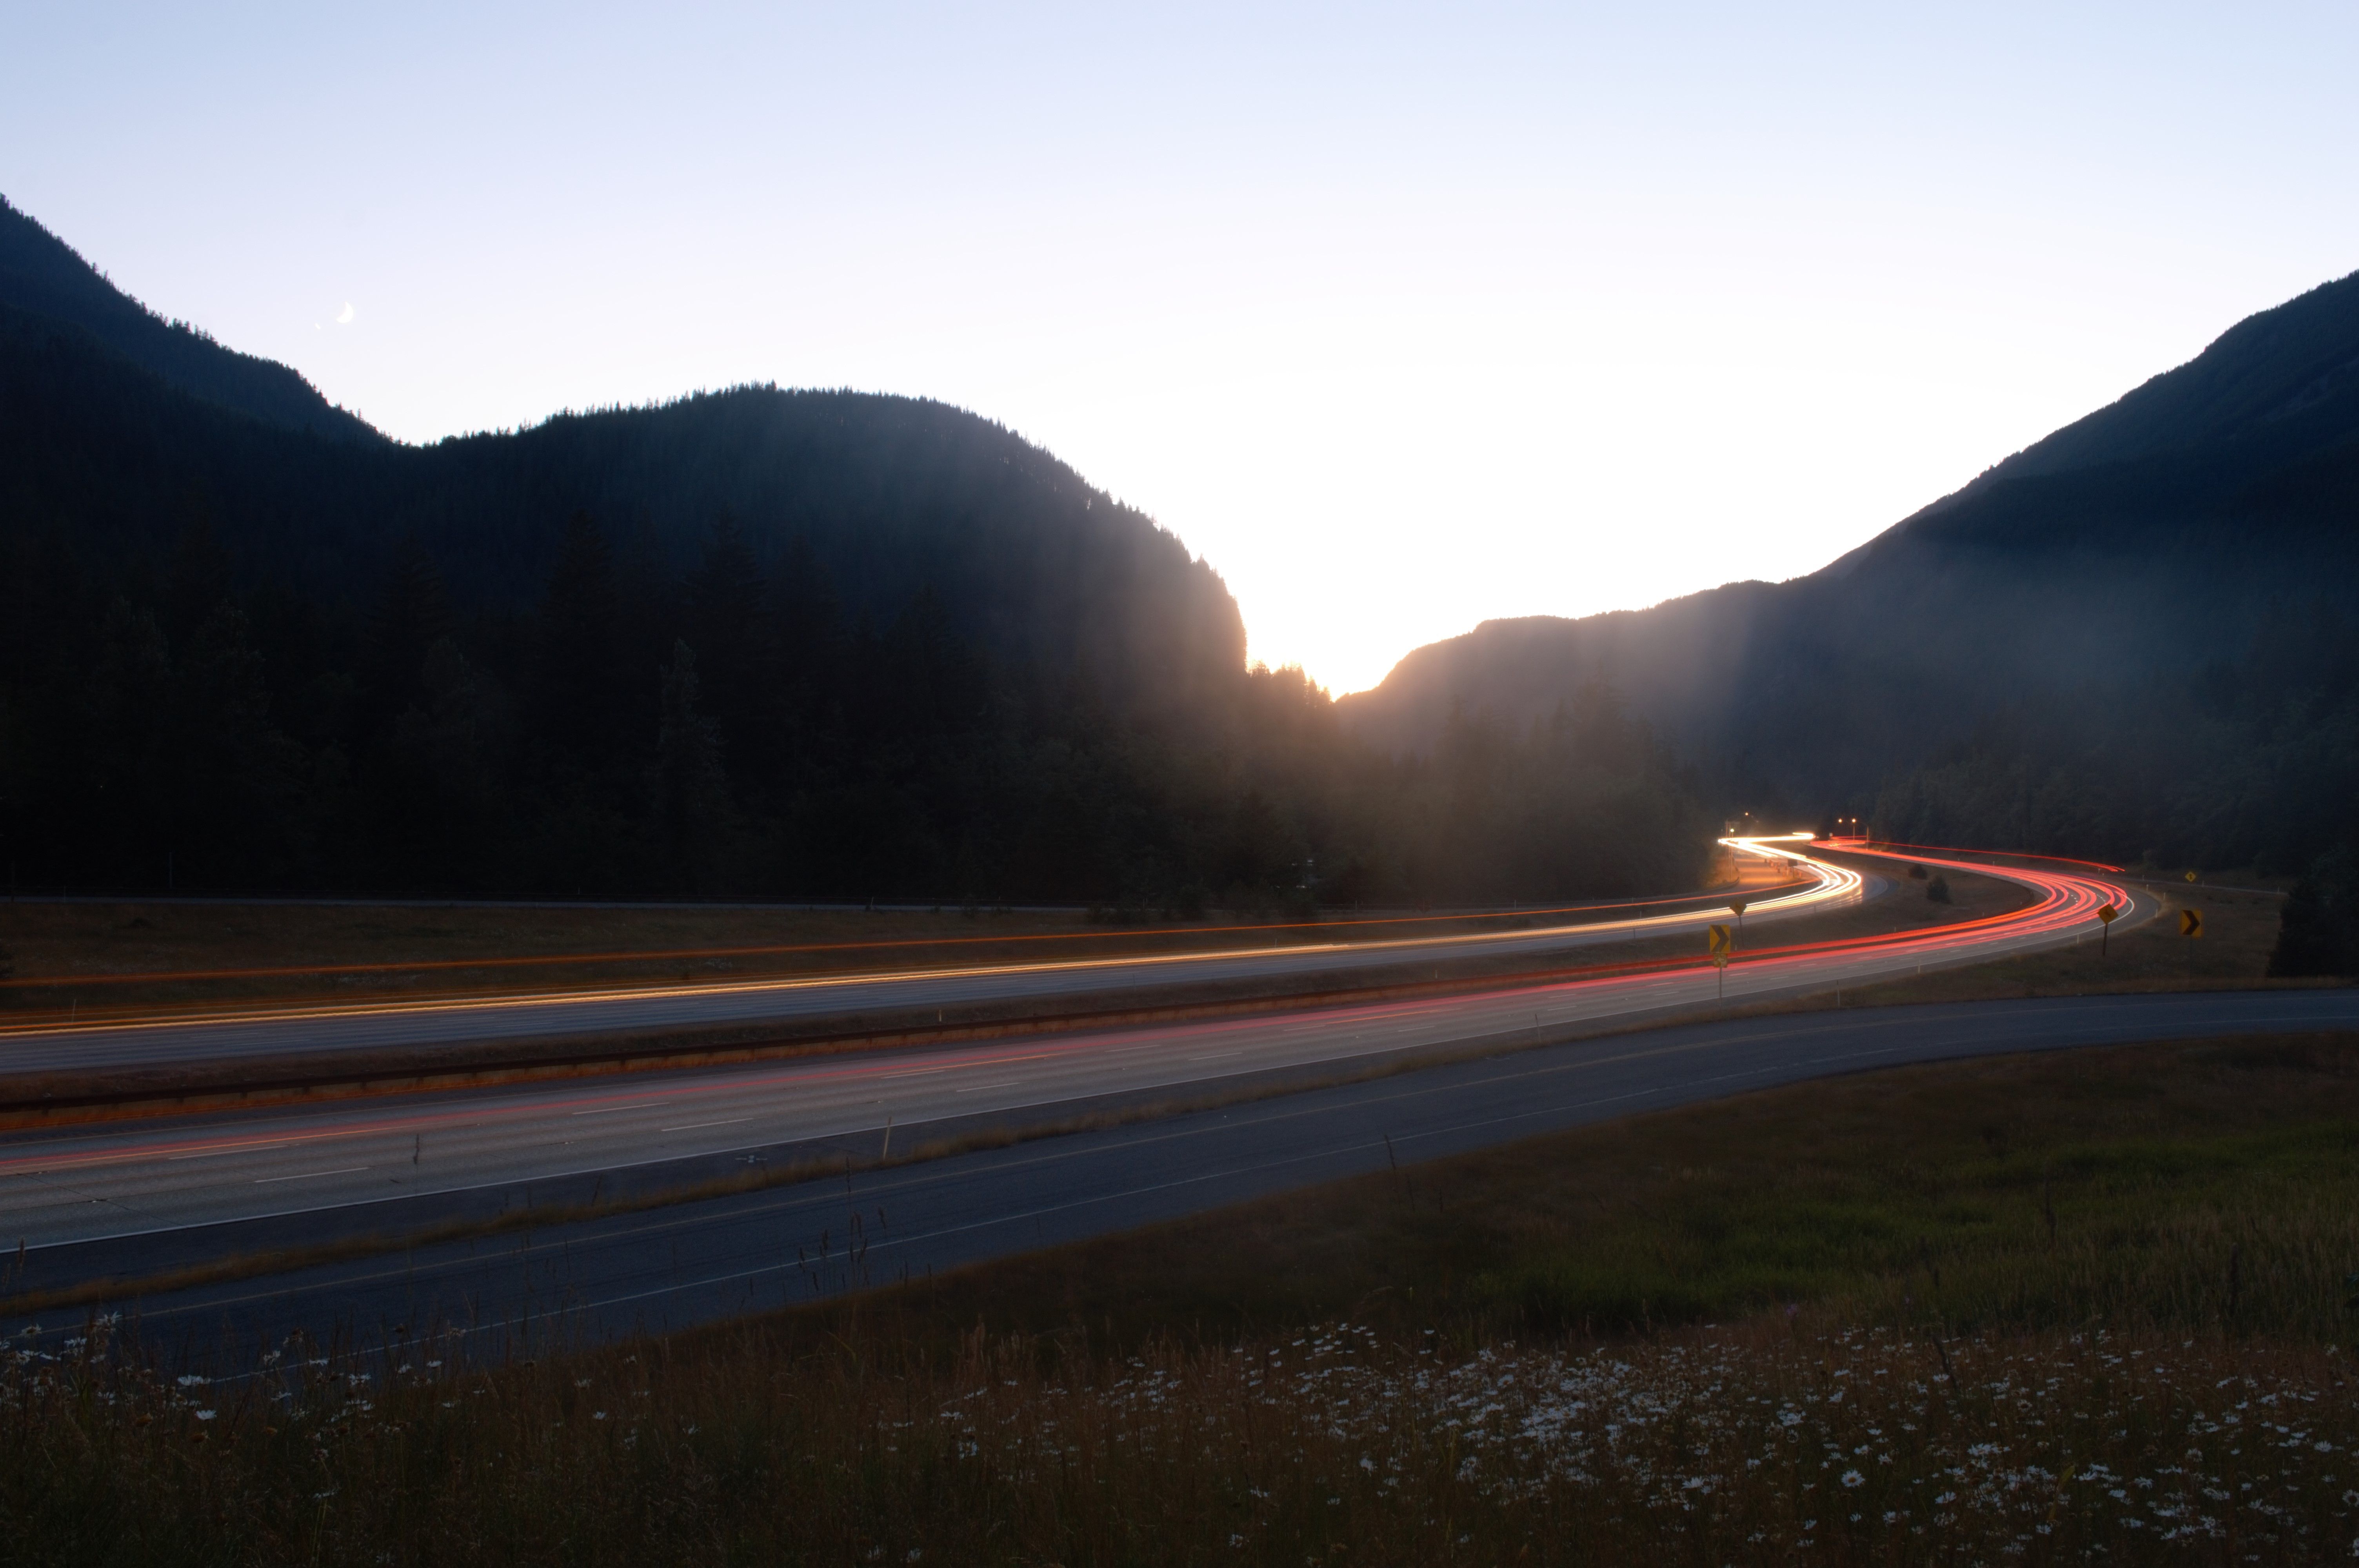 Freeway of snoqualmie pass lighting up during the most spectacular night where venus is next to the moon